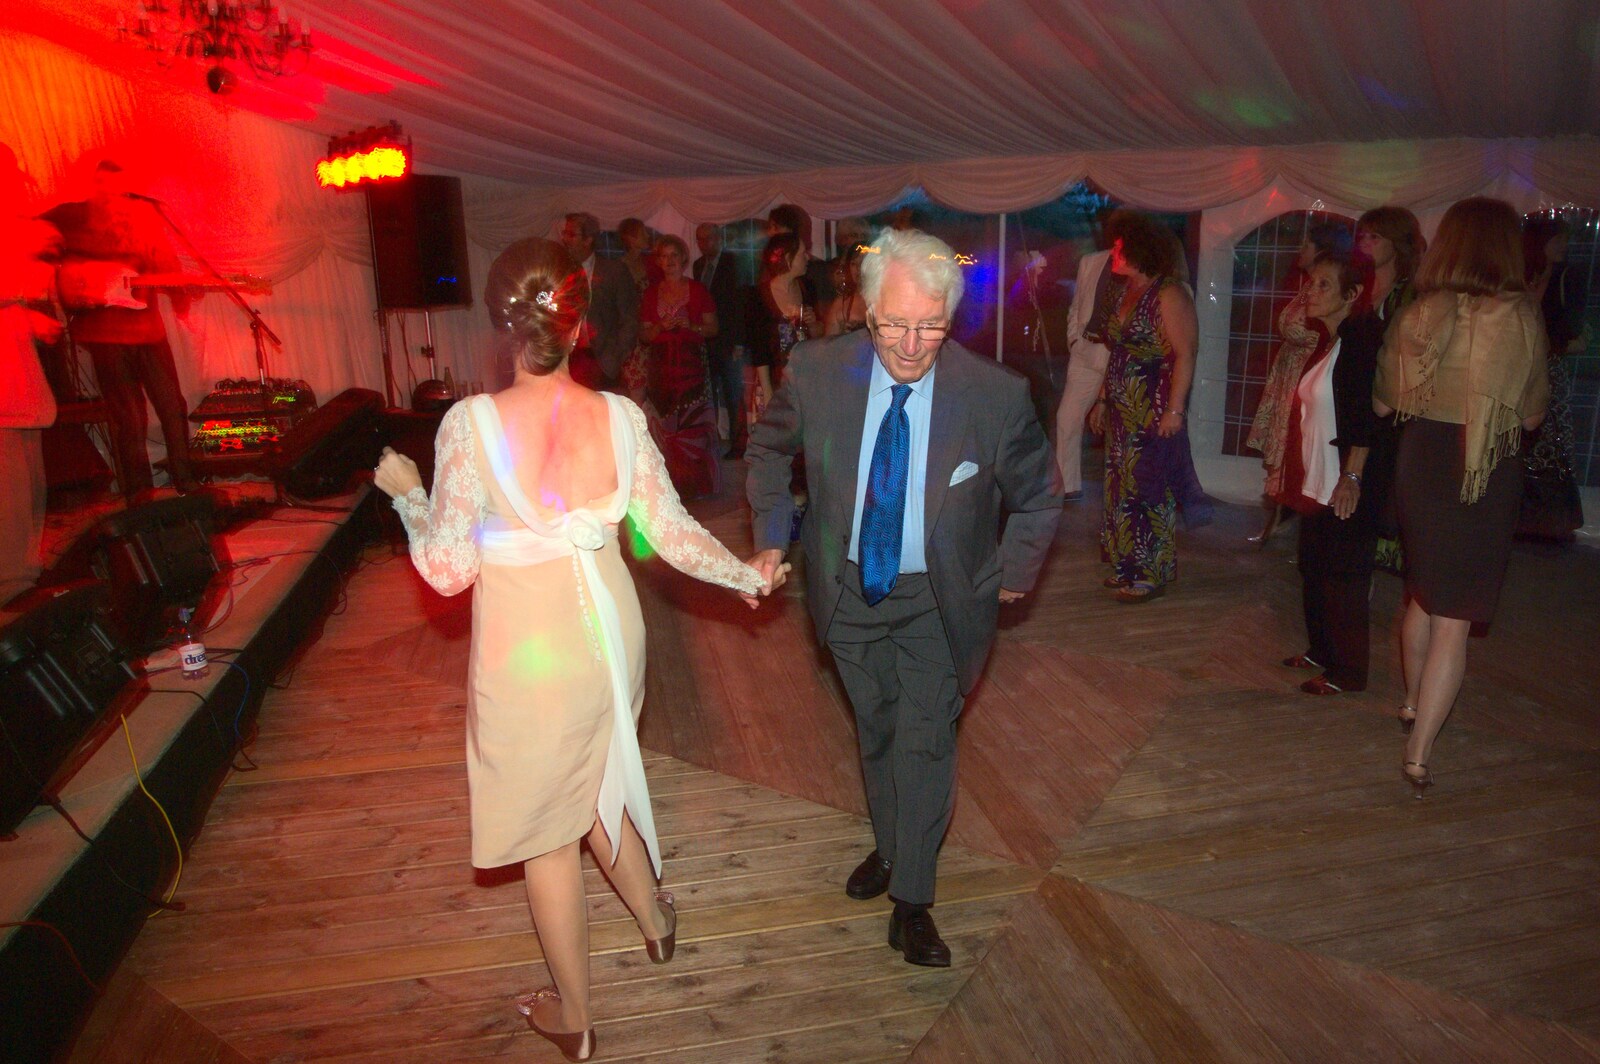 Wilma dances to the Mustard Men from Rob and Wilma's Wedding, Thornham and Thrandeston, Suffolk - 6th August 2011